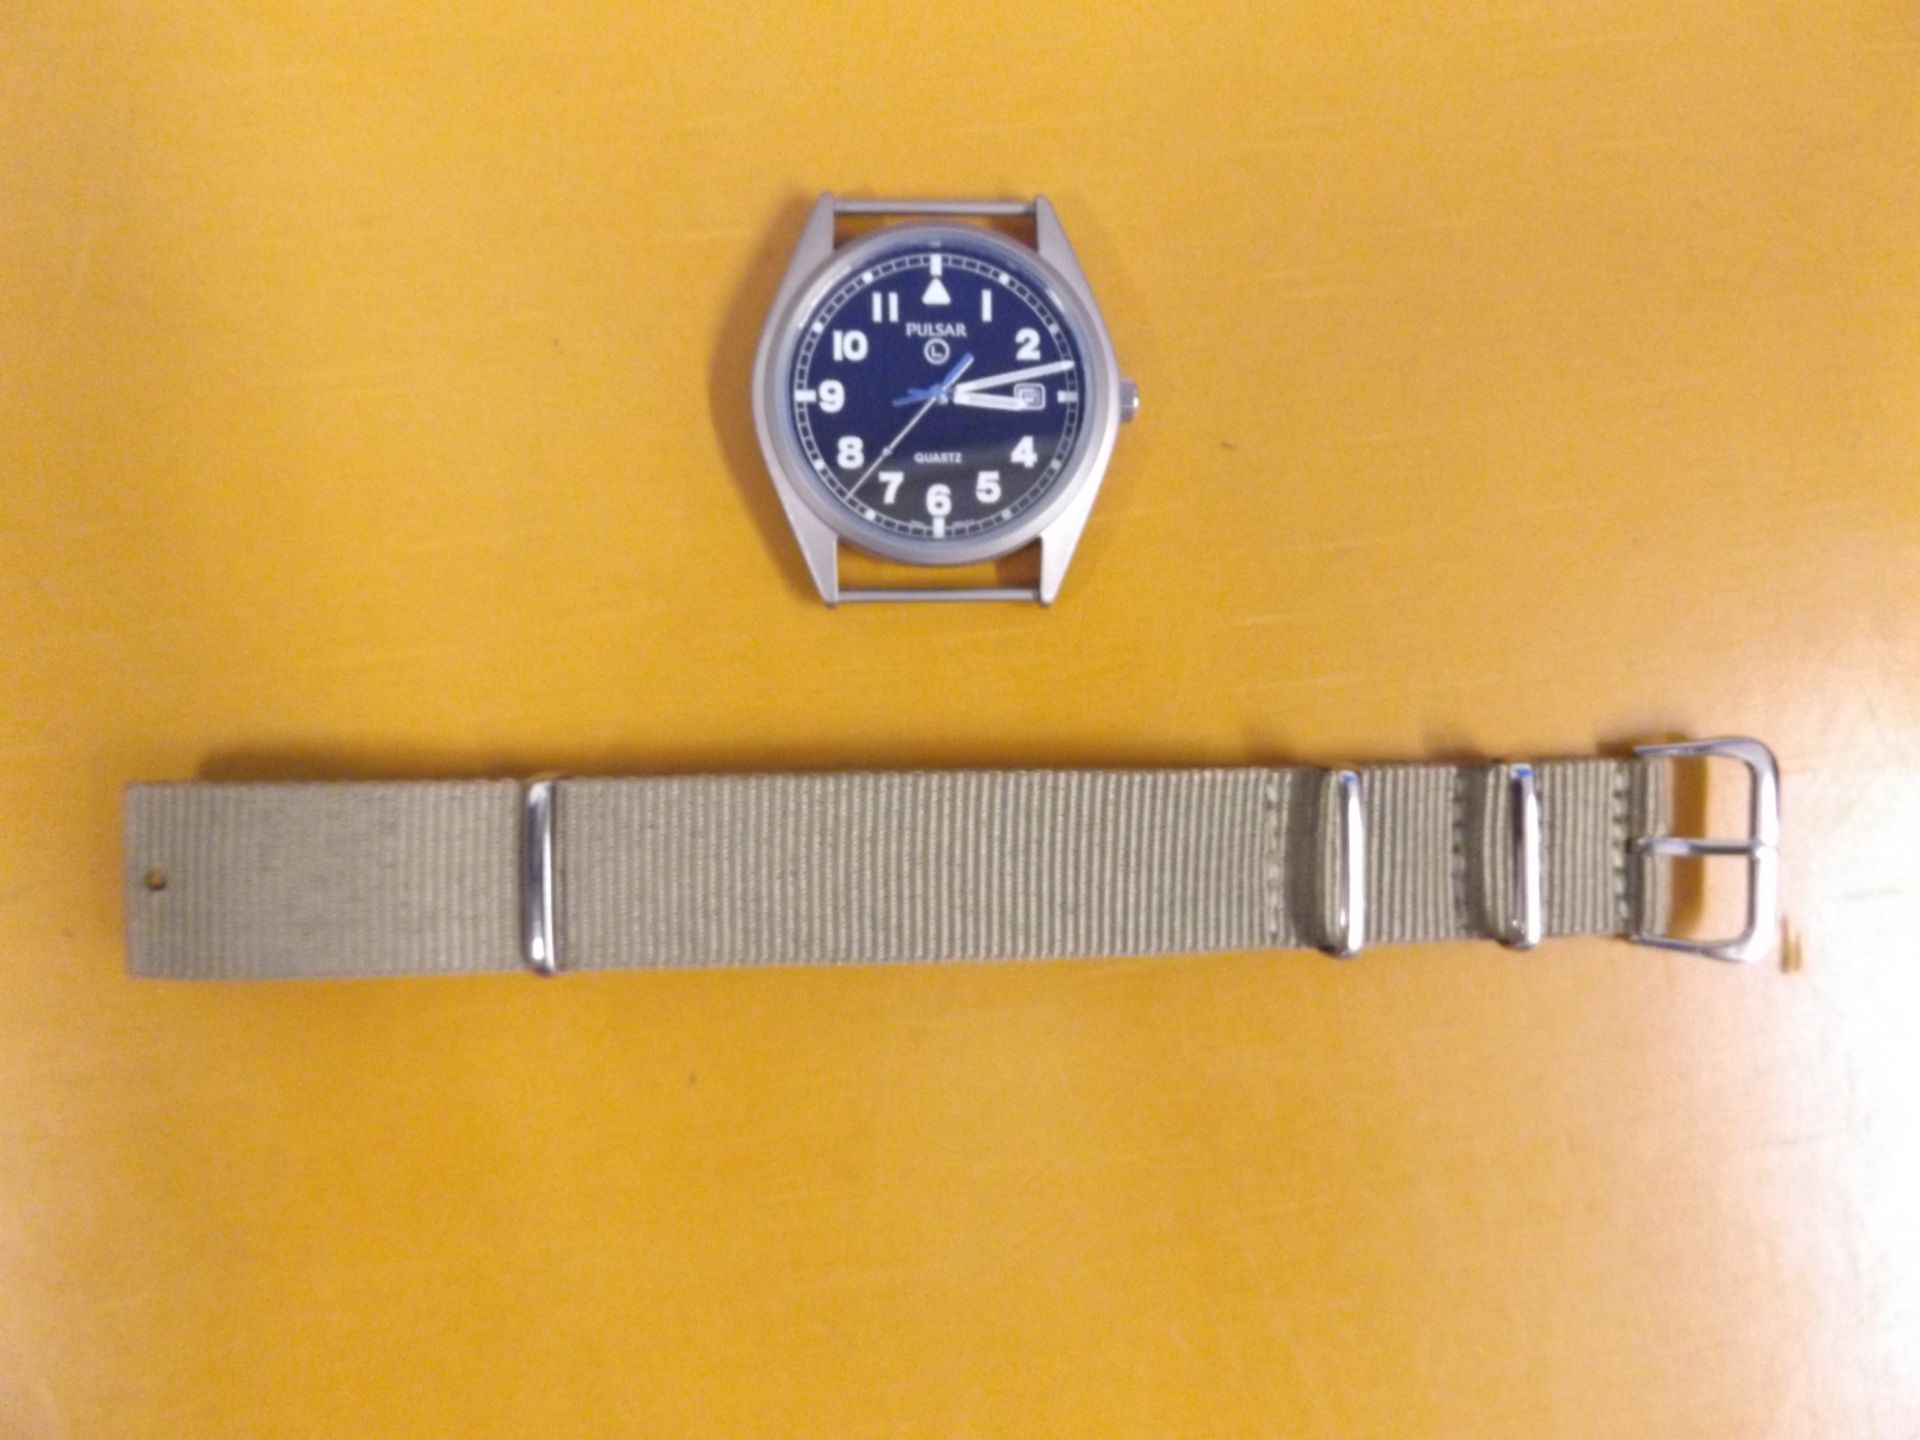 Unissued Pulsar G10 wrist watch - Afghan Issue - Image 7 of 7